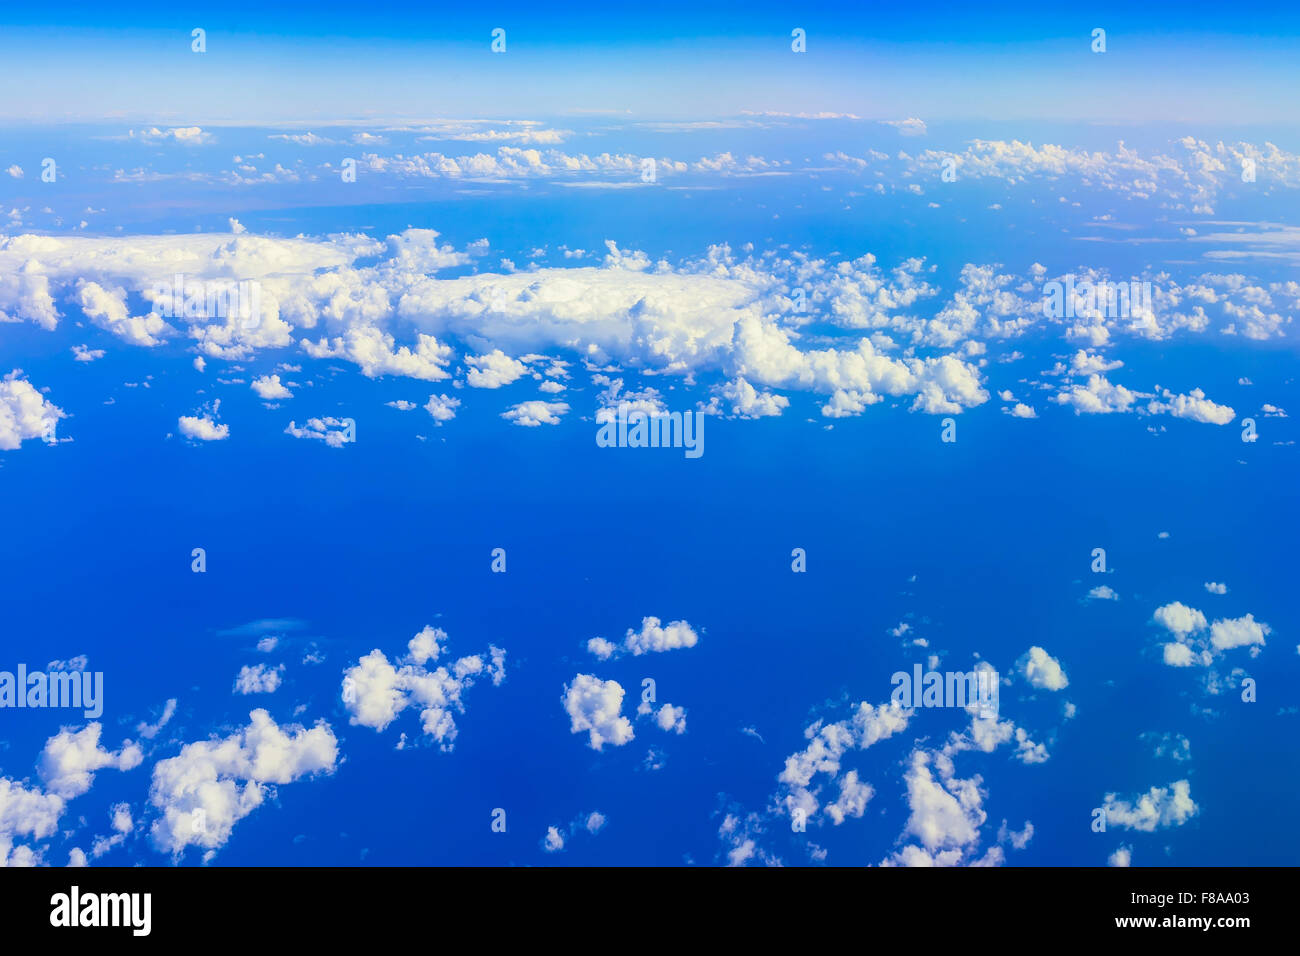 View on blue sky above white clouds from the window of aircraft with skyline, horizon over ocean Stock Photo